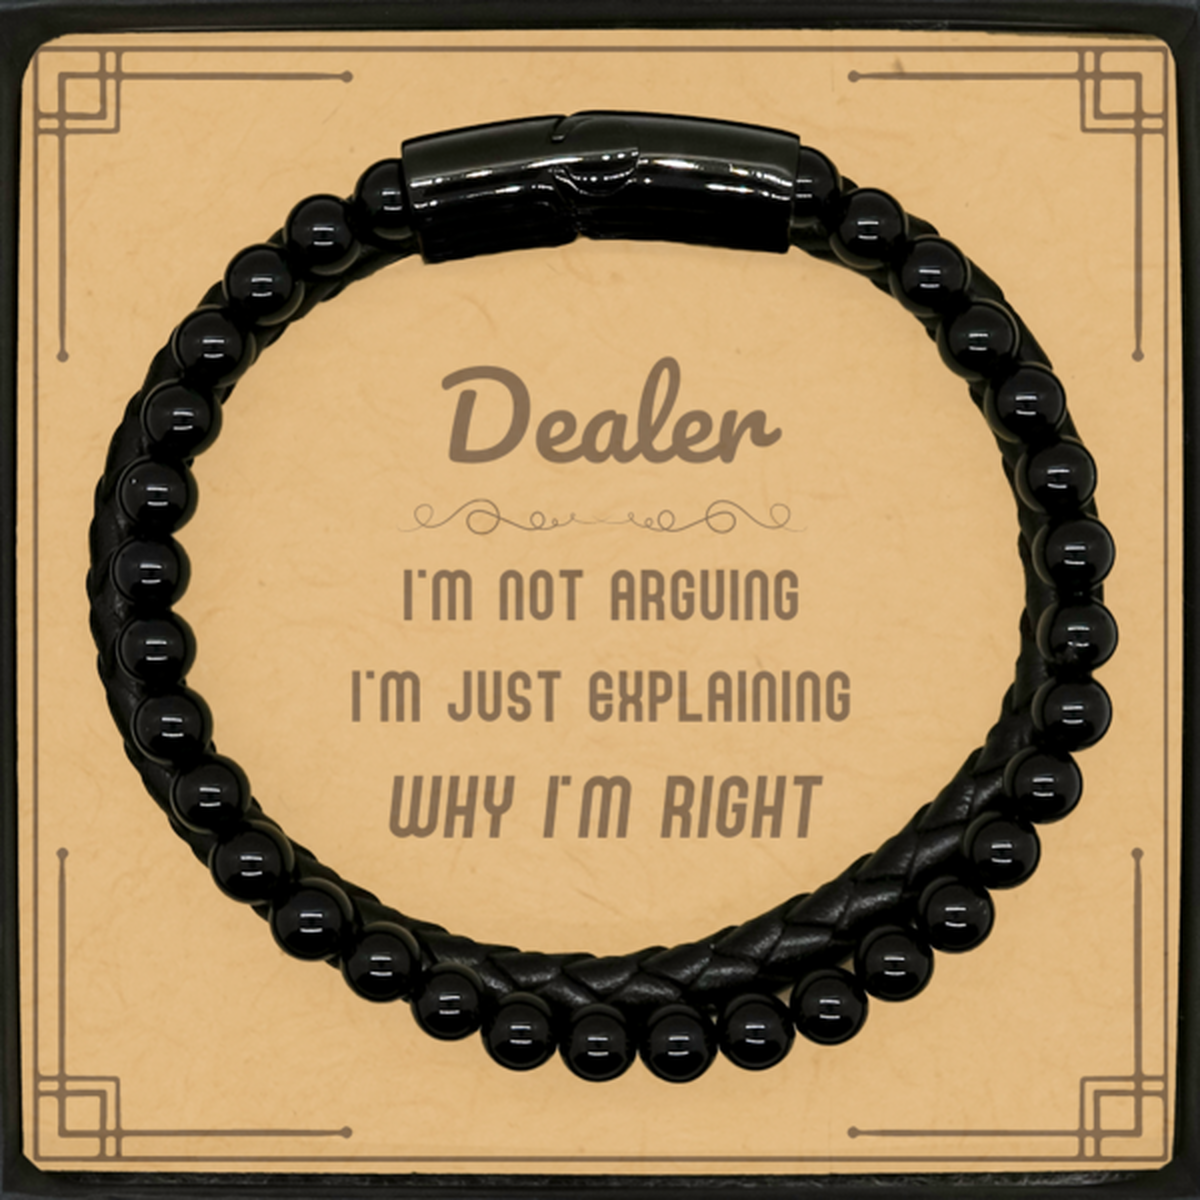 Dealer I'm not Arguing. I'm Just Explaining Why I'm RIGHT Stone Leather Bracelets, Funny Saying Quote Dealer Gifts For Dealer Message Card Graduation Birthday Christmas Gifts for Men Women Coworker